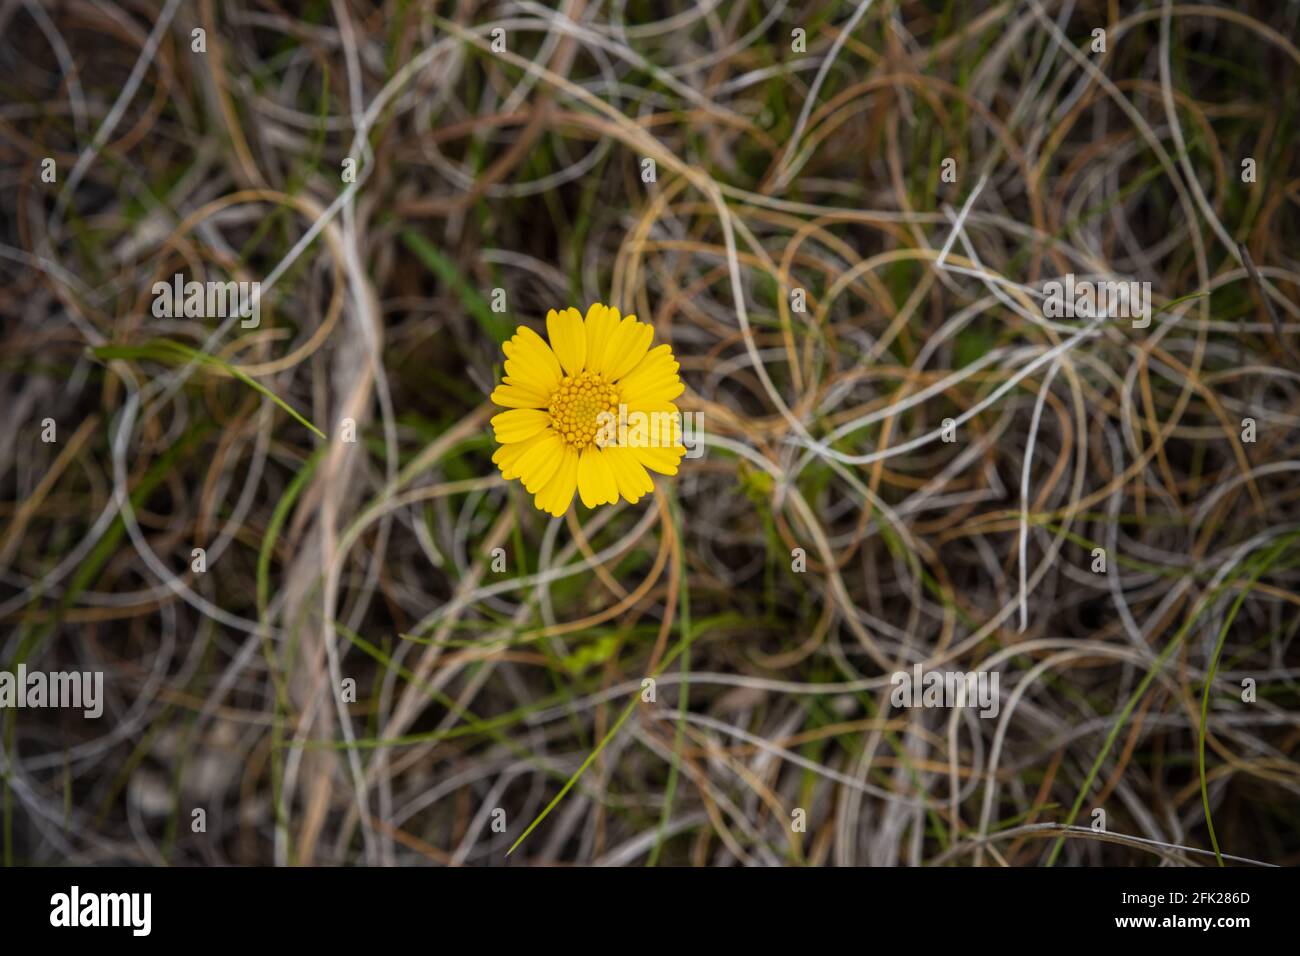 A Single Yellow Flower, tetraneuris acaulis, of the Texas Hill Country, Outside Bandera, Texas, in the Spring with a Grassy Background Stock Photo